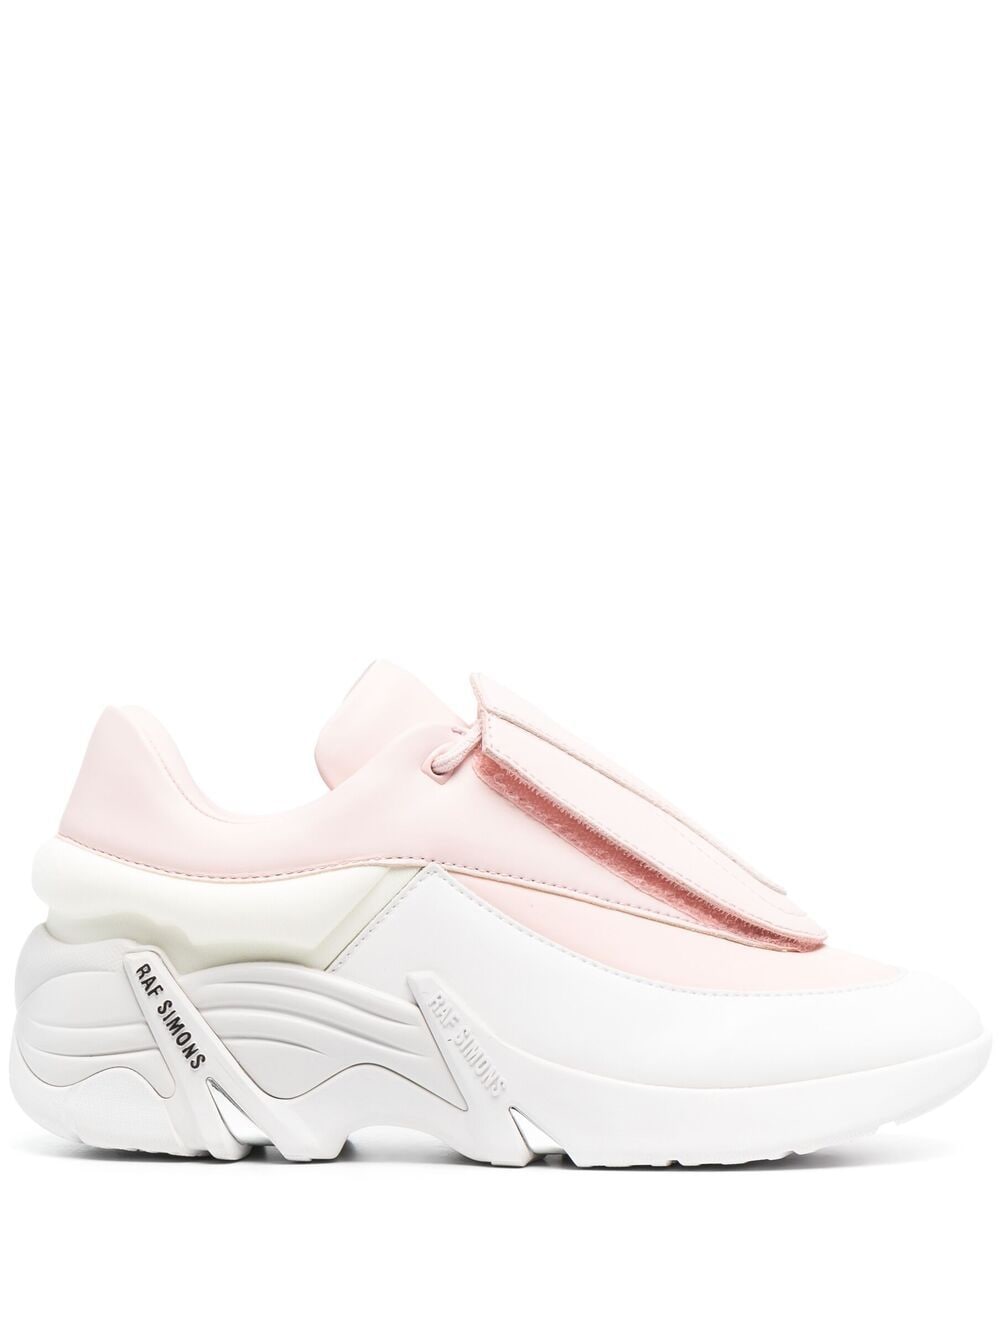 RAF SIMONS TWO-TONE OVERSIZE-SOLE SNEAKERS